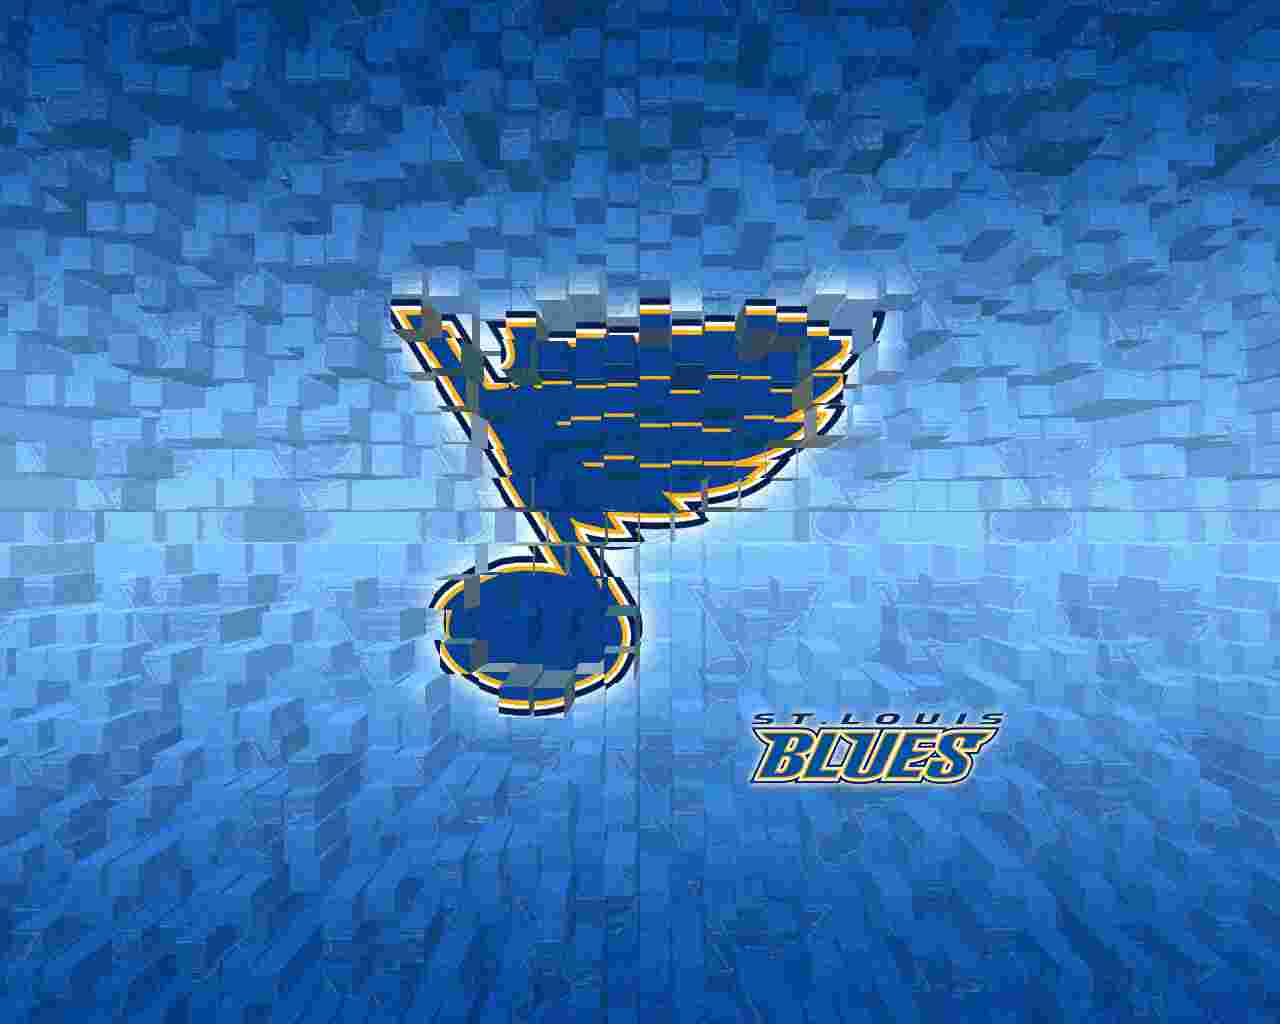 Download wallpapers St Louis Blues, logo, emblem, blue yellow background,  NHL, American hockey club for desktop free. Pictures for desktop free